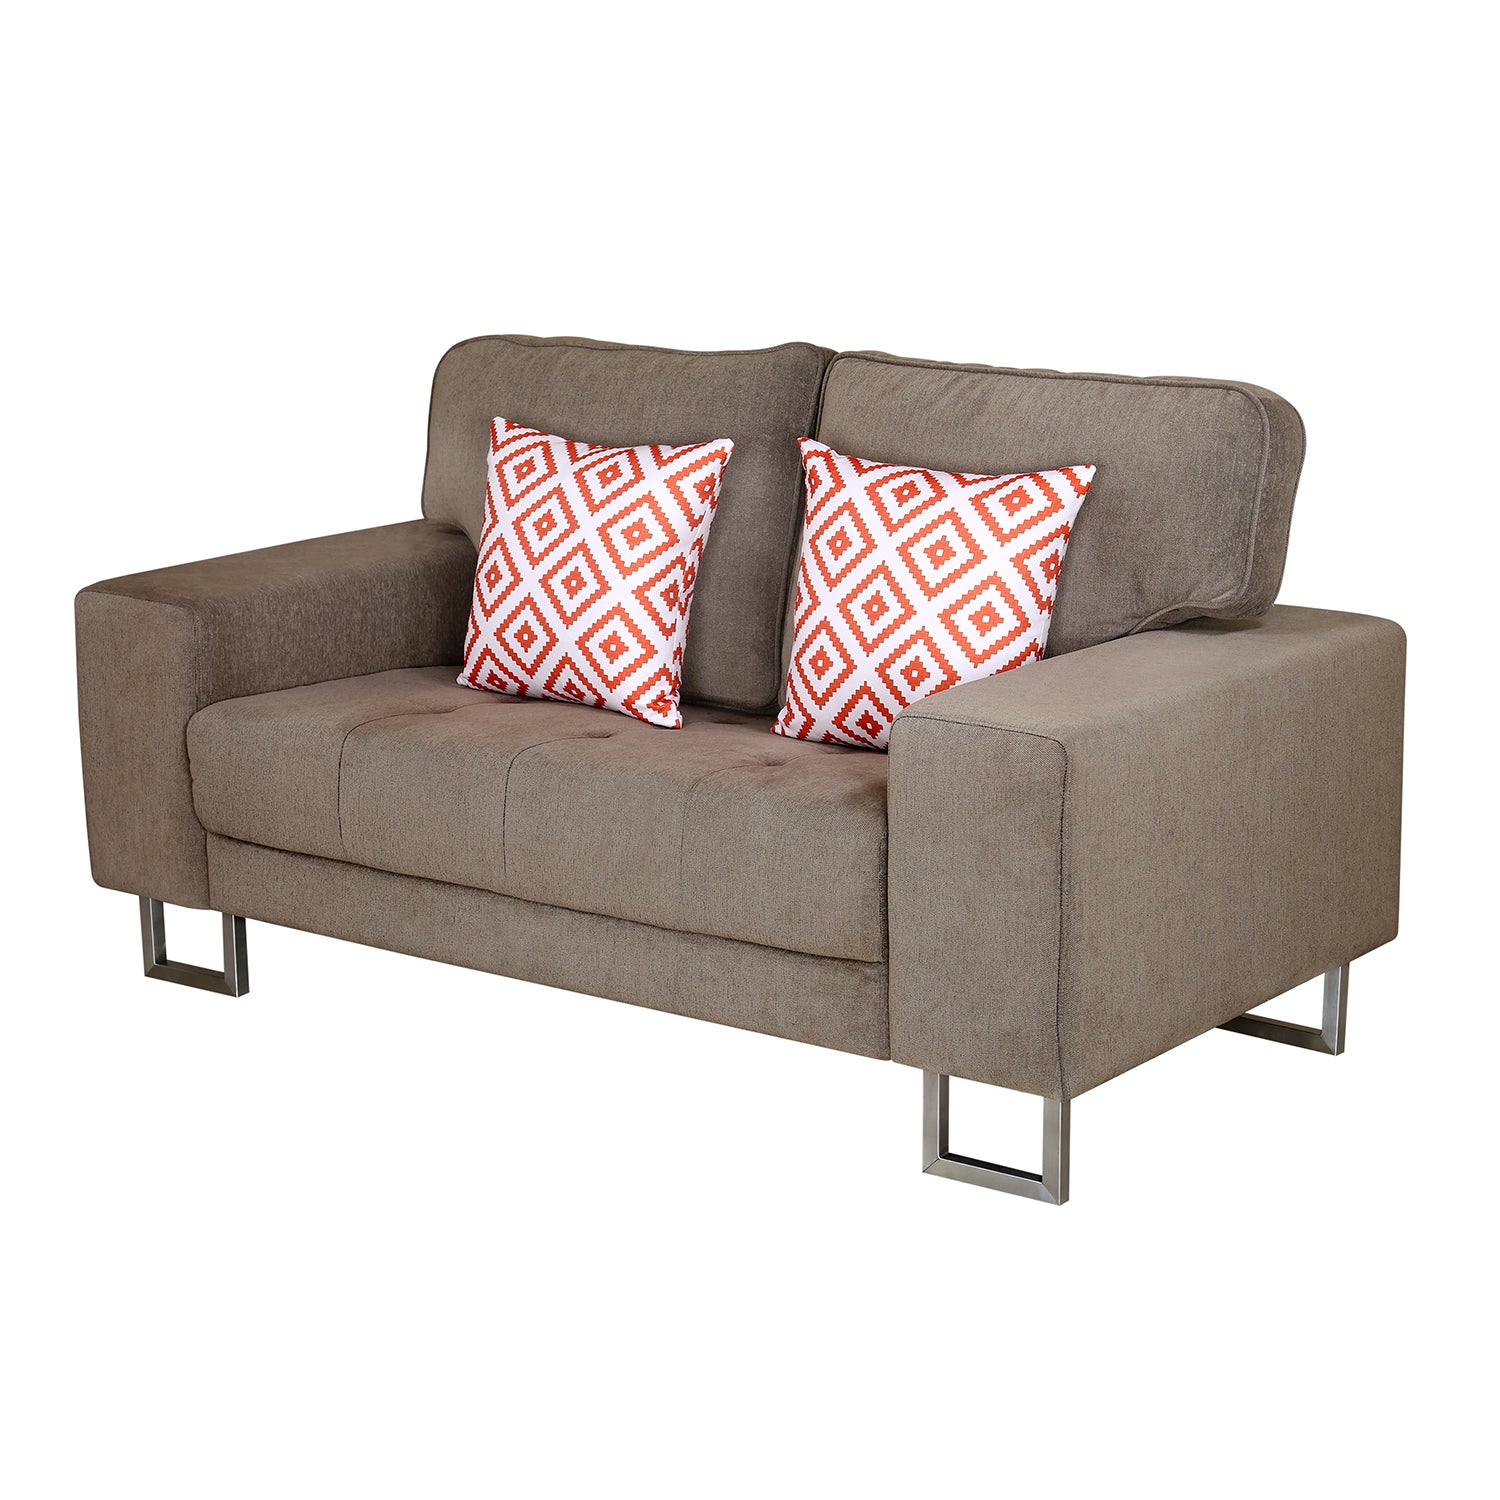 Chicago 2 Seater Sofa (Brown)